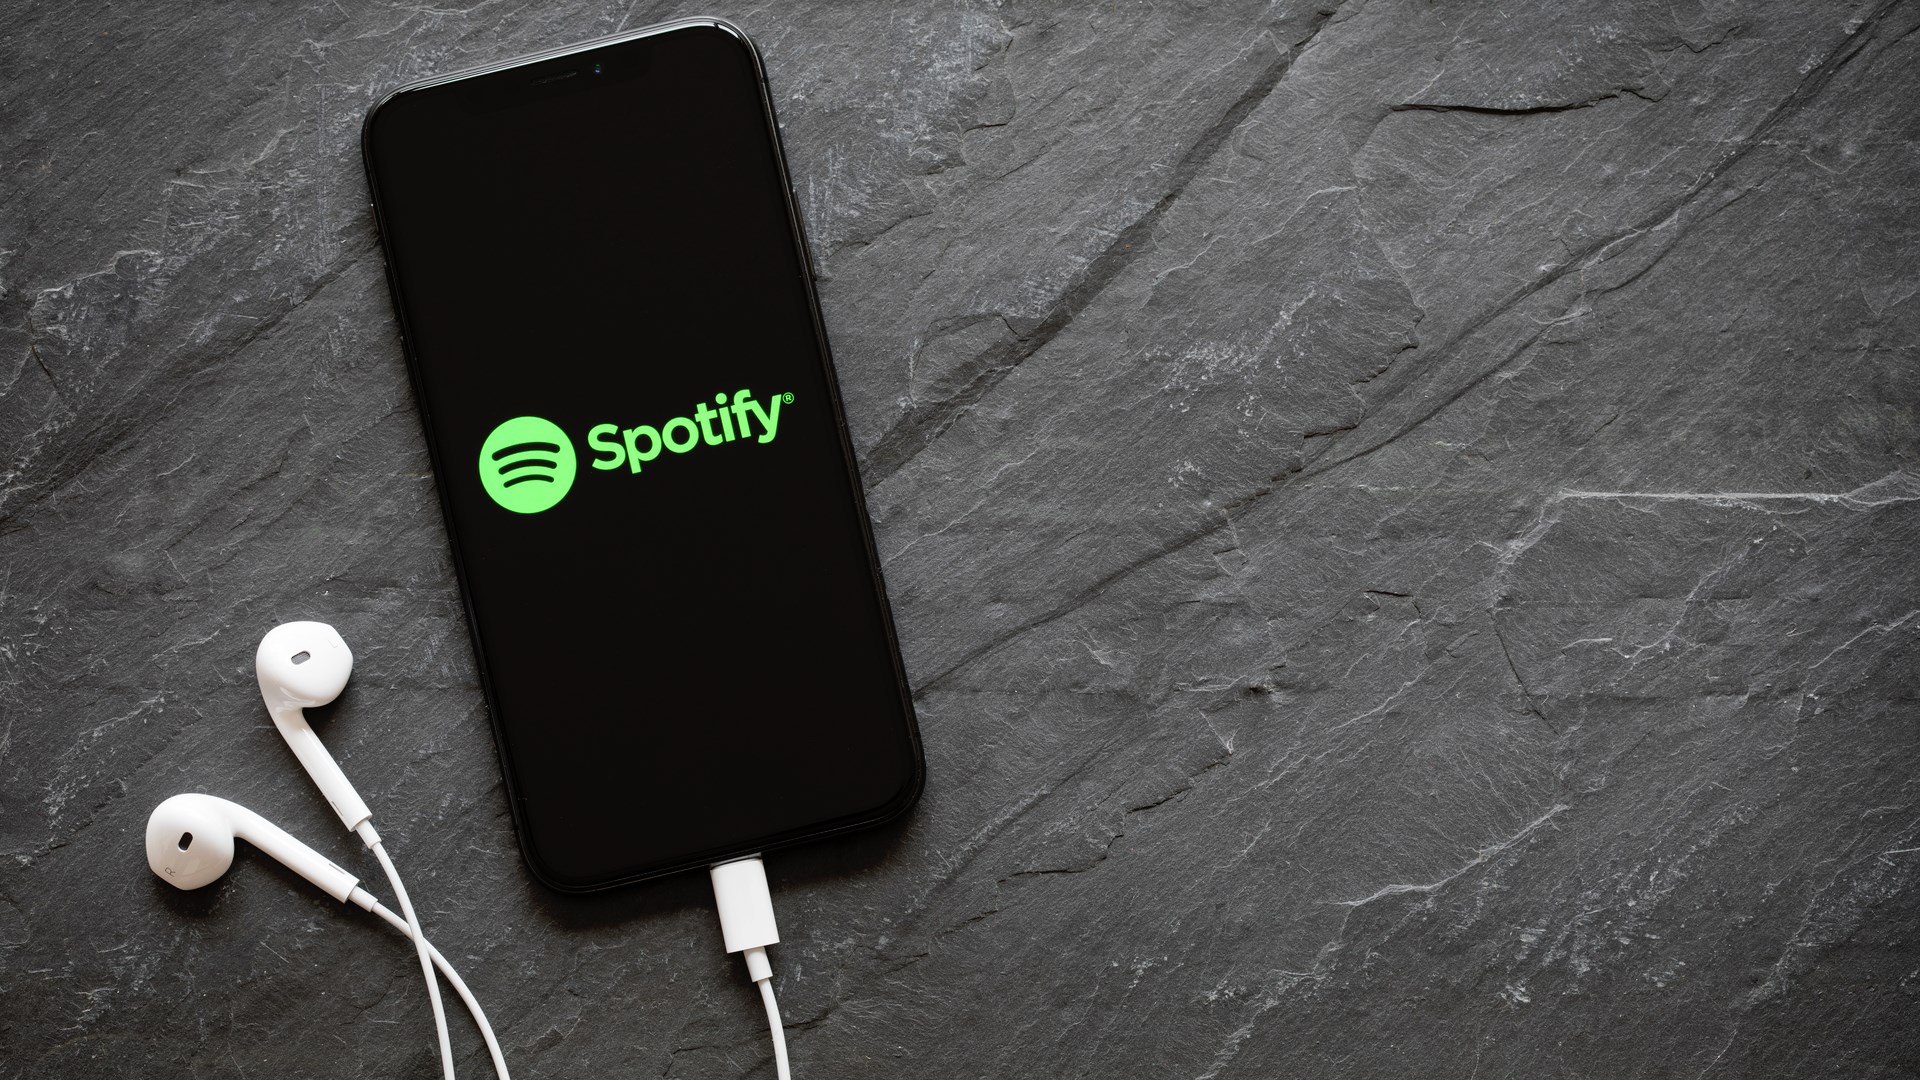 Why is Spotify the Most Popular Music Streaming Service?